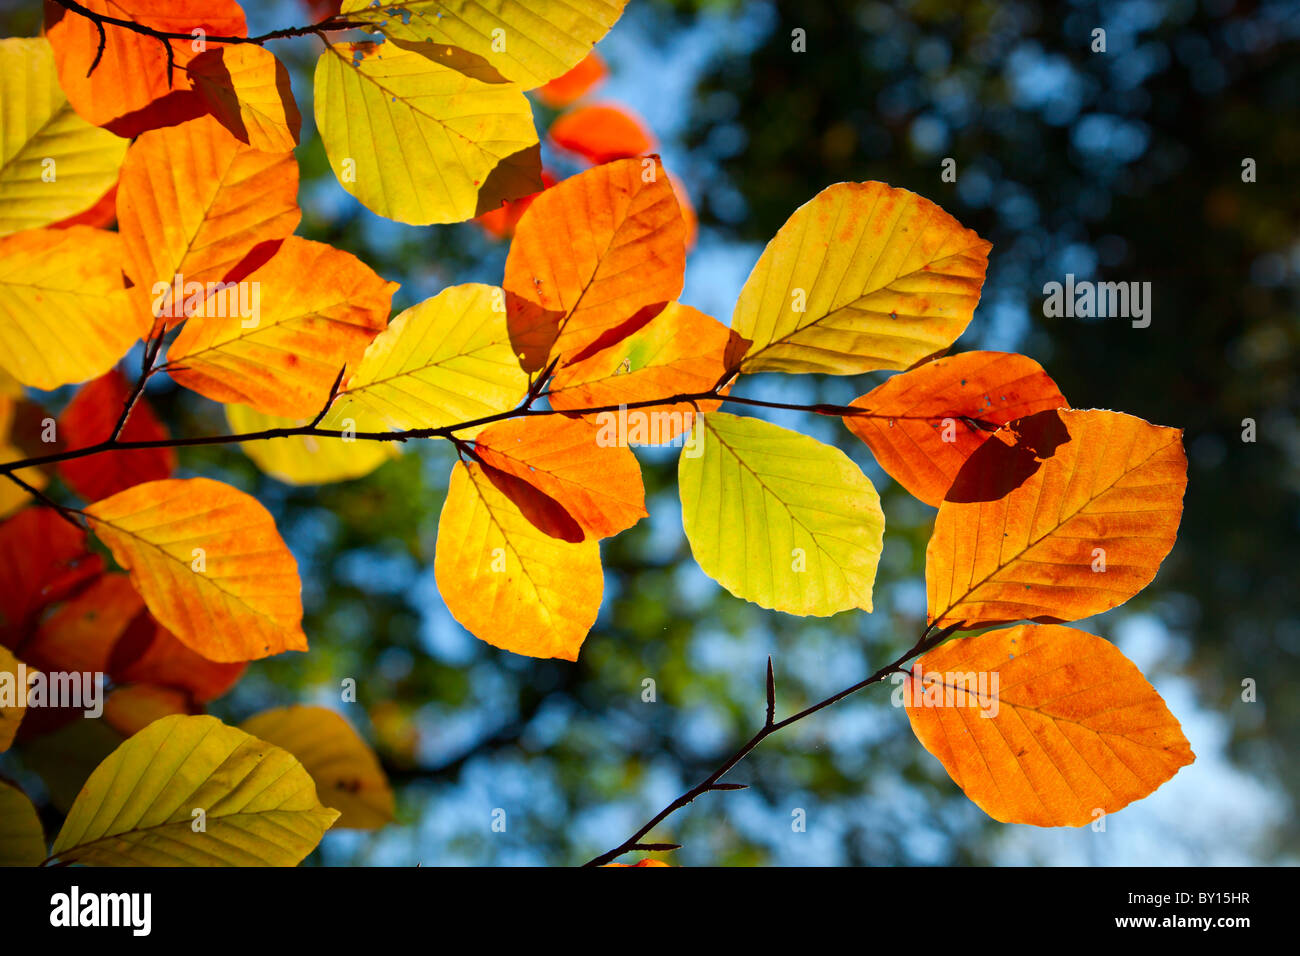 Close-up image of colorful autumn leaves of the Beech tree Fagus sylvatica in an English woodland. Taken looking through the canopy to a blue sky. Stock Photo